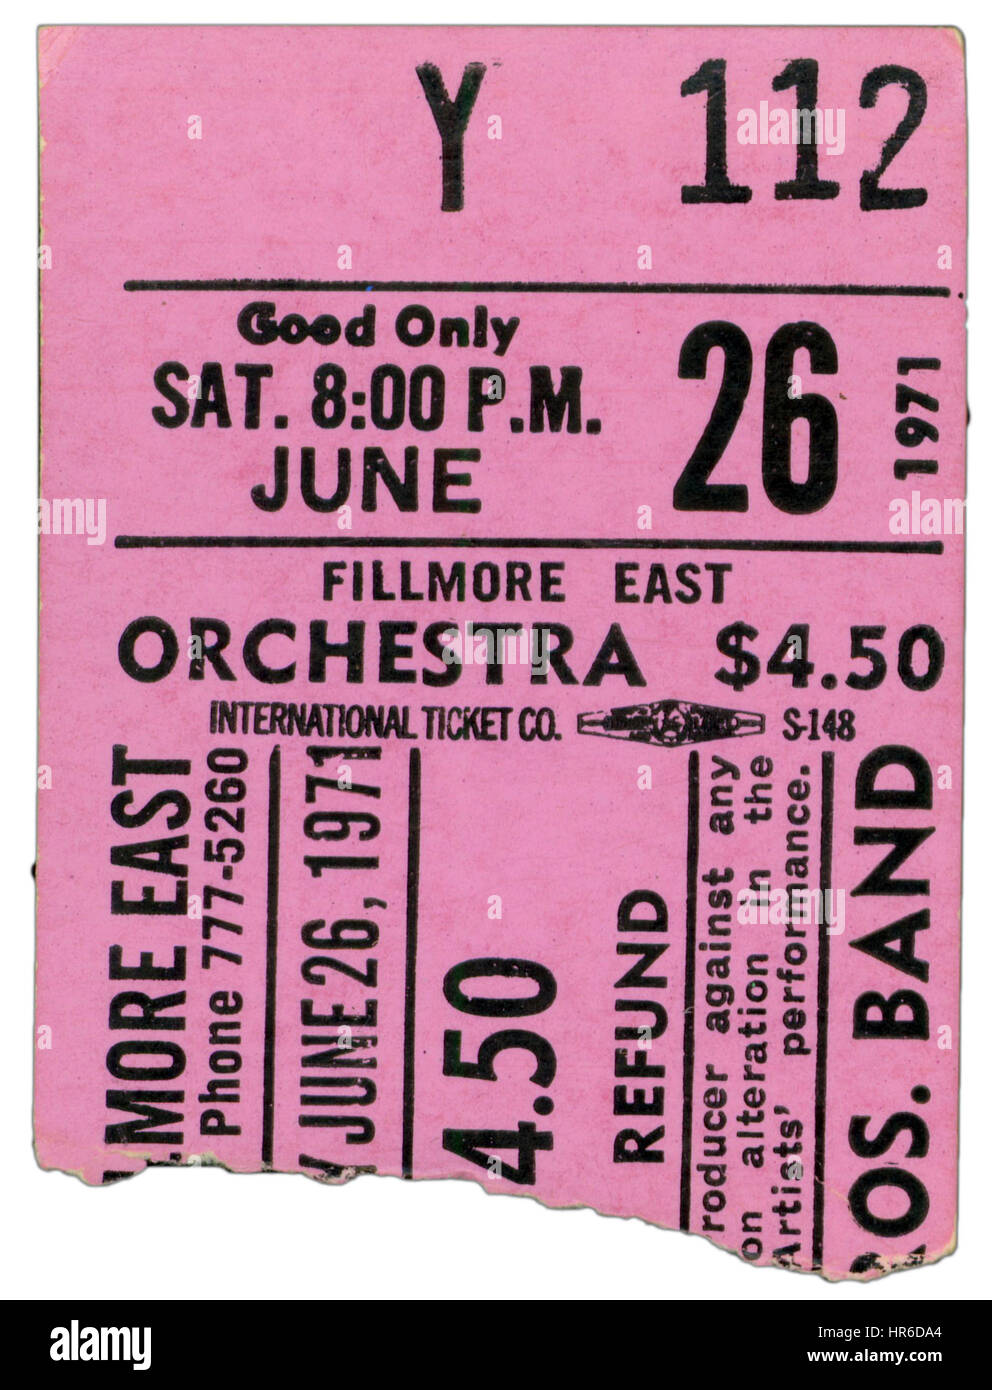 Ticket Stub of The Allman Brothers Band performing at Fillmore East in New York City on June 26th, 1971 Stock Photo